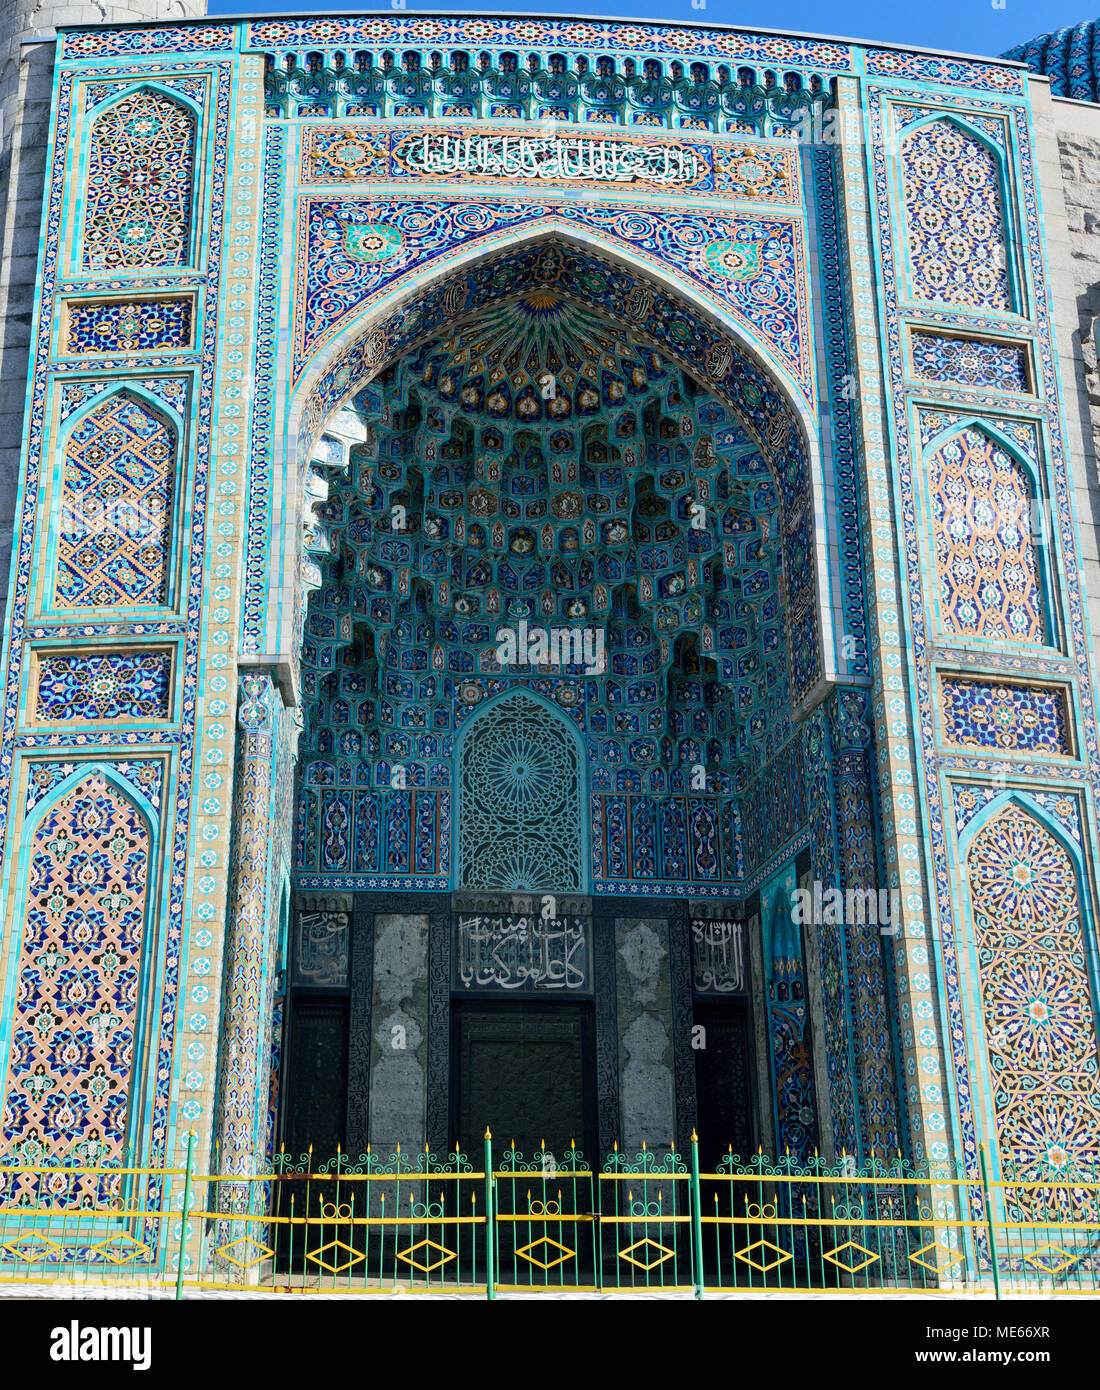 St Petersburg, Russia - March 27, 2018. Exterior portal of the St Petersburg mosque, with mosaic ceramics. Stock Photo